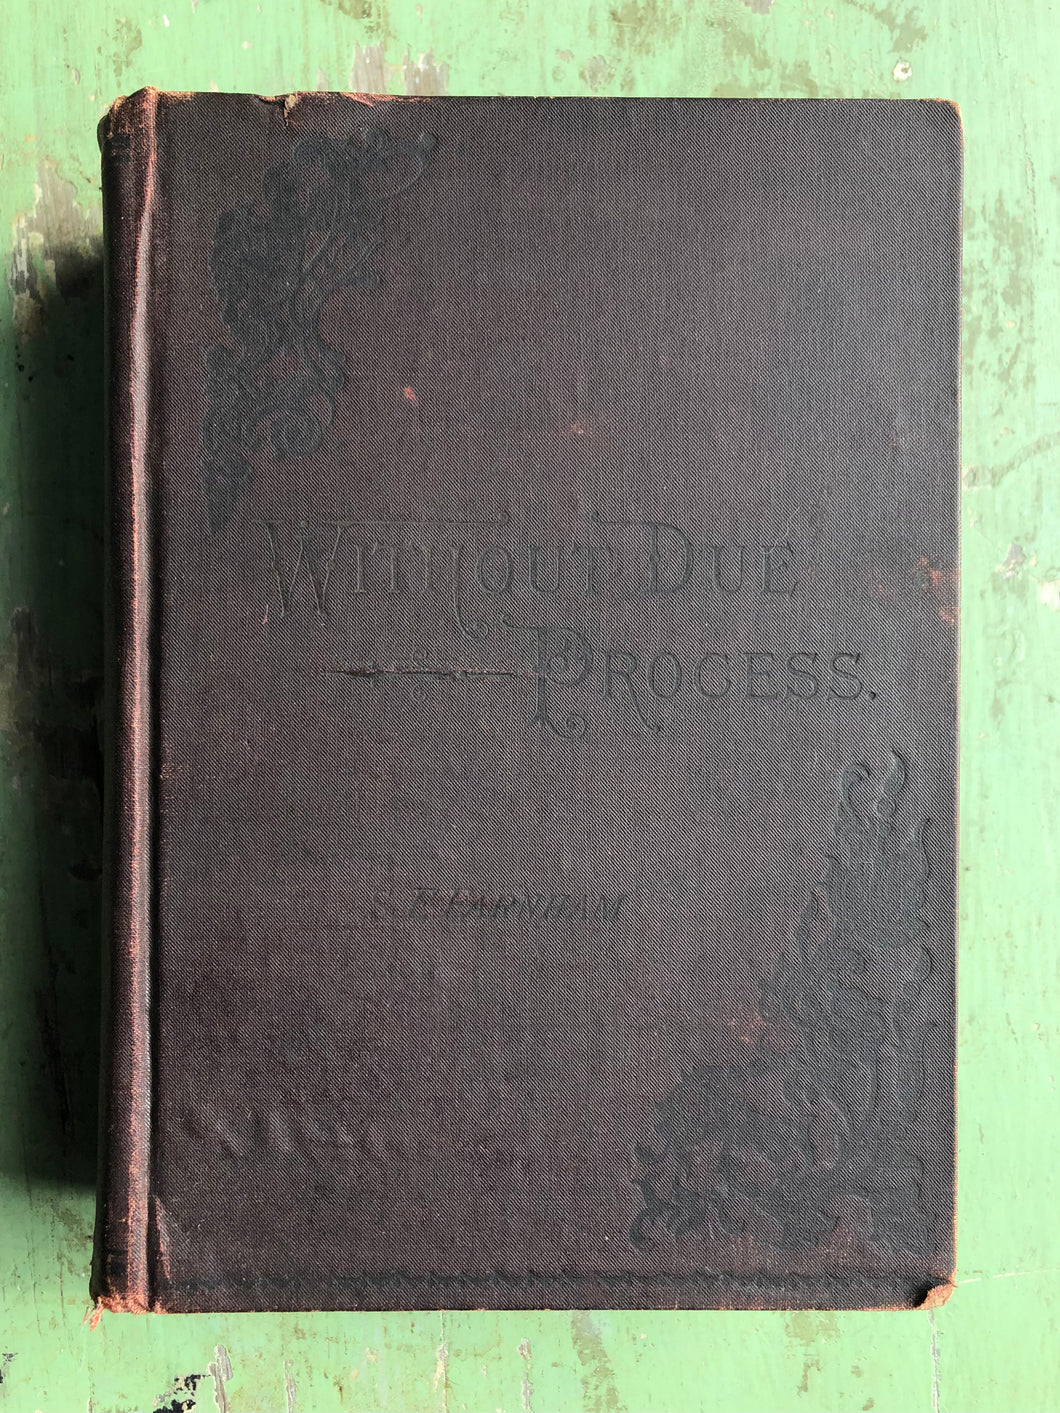 Without Due Process; A Typical Tale of Life on the Rail in the Latter Part of the Nineteenth Century by S. E. Farnham